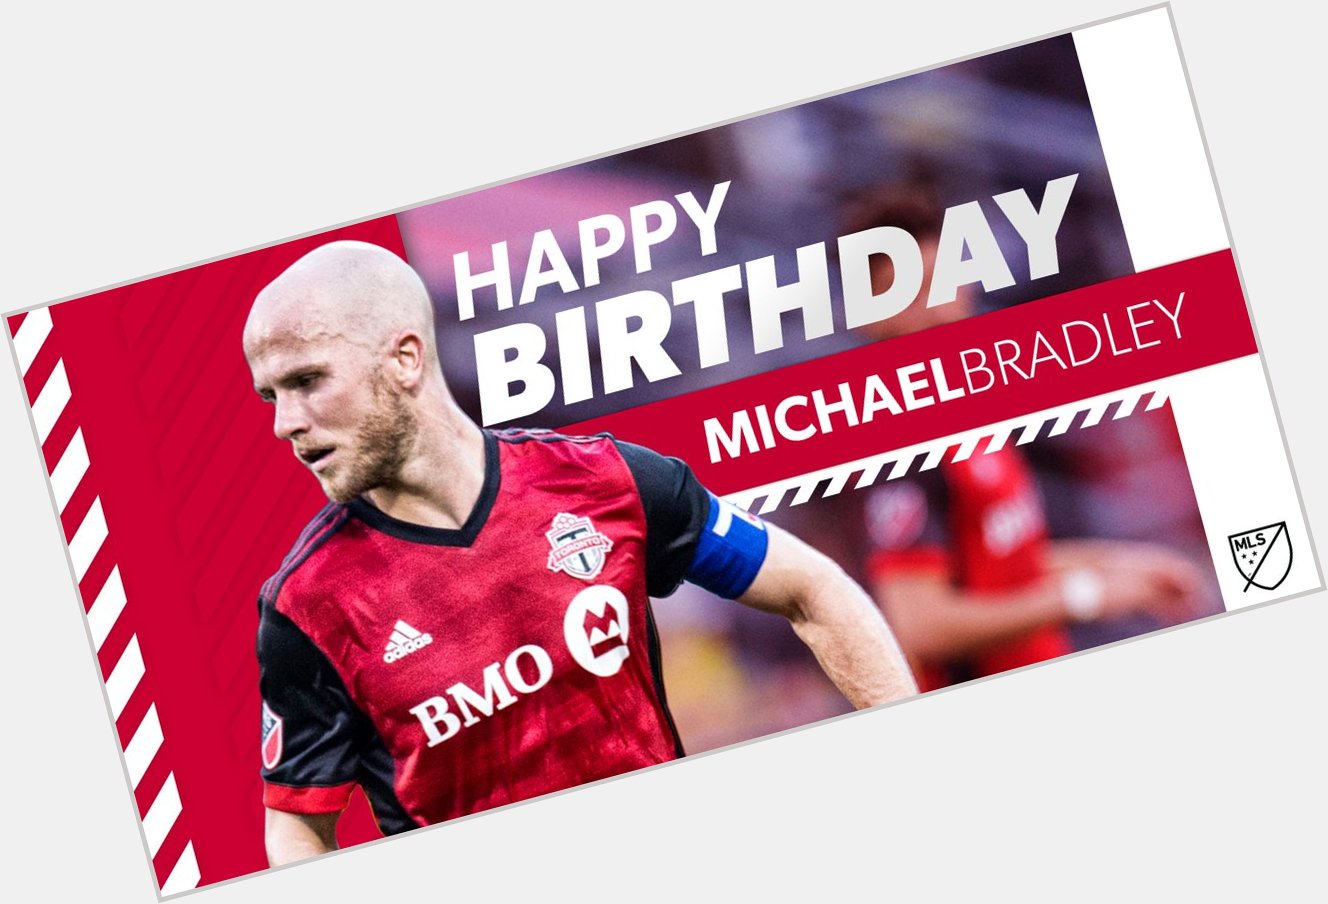 We\re celebrating an today! Happy birthday to the one and only Michael Bradley. 